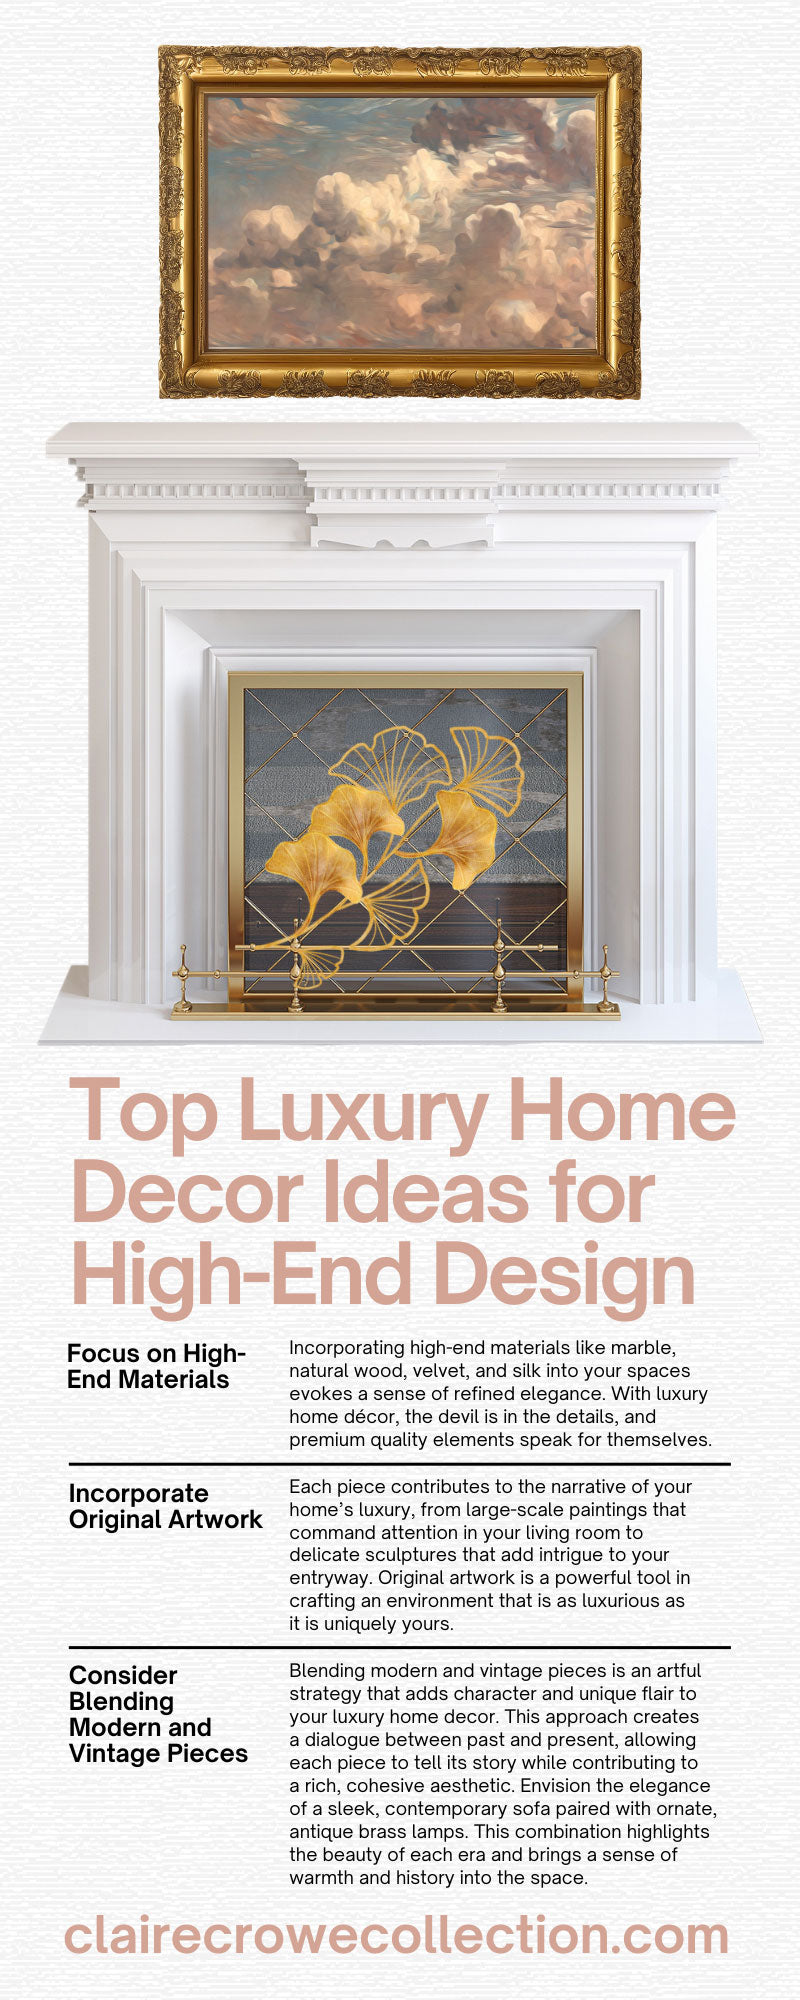 Top 8 Luxury Home Decor Ideas for High-End Design